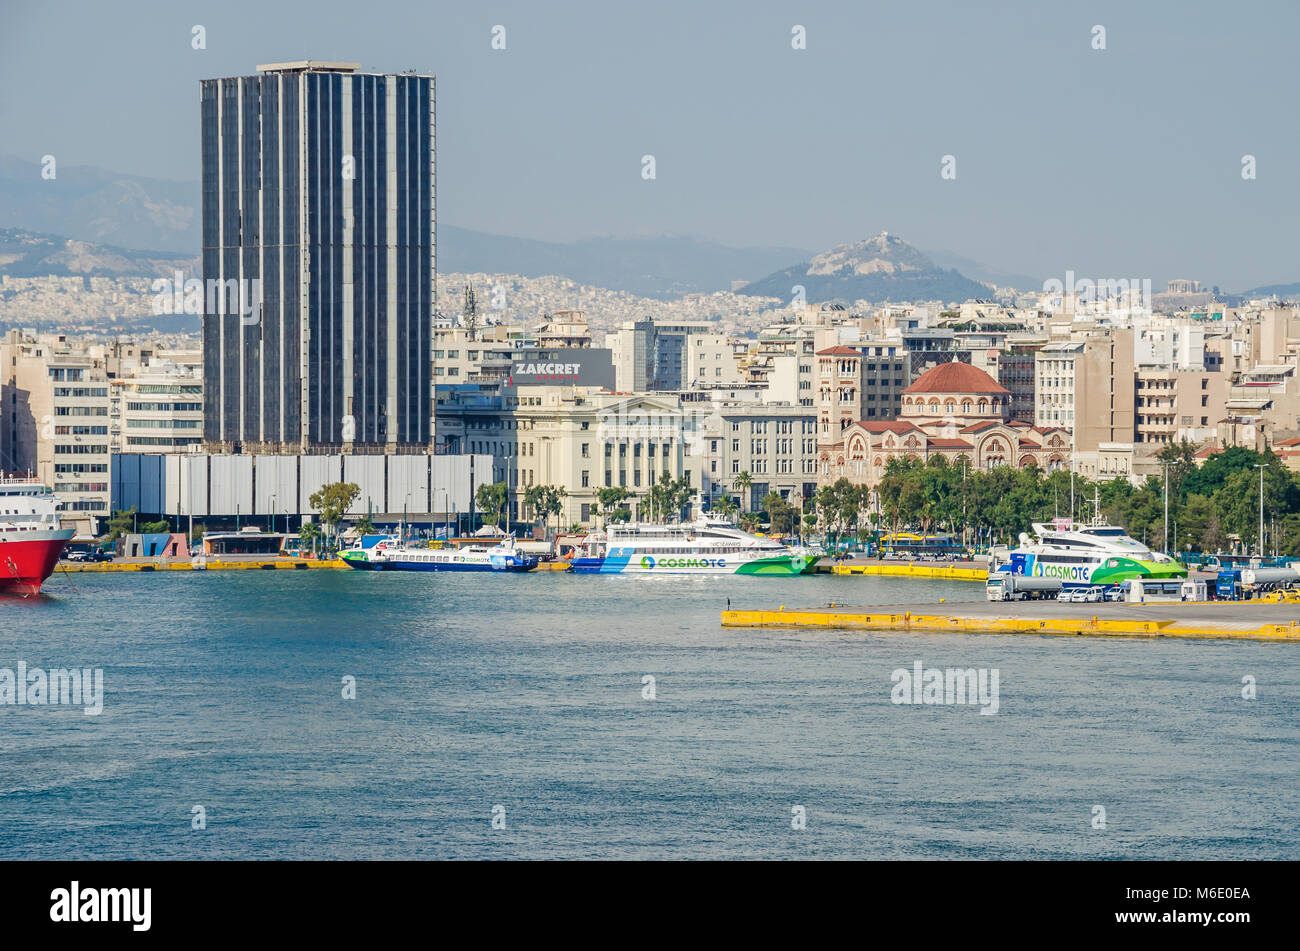 Port of Piraeus, Greece - Mai 30, 2017: View of the Piraeus Tower, the building of the Maritime Retirement Fund, the Holy Trinity Cathedral Stock Photo